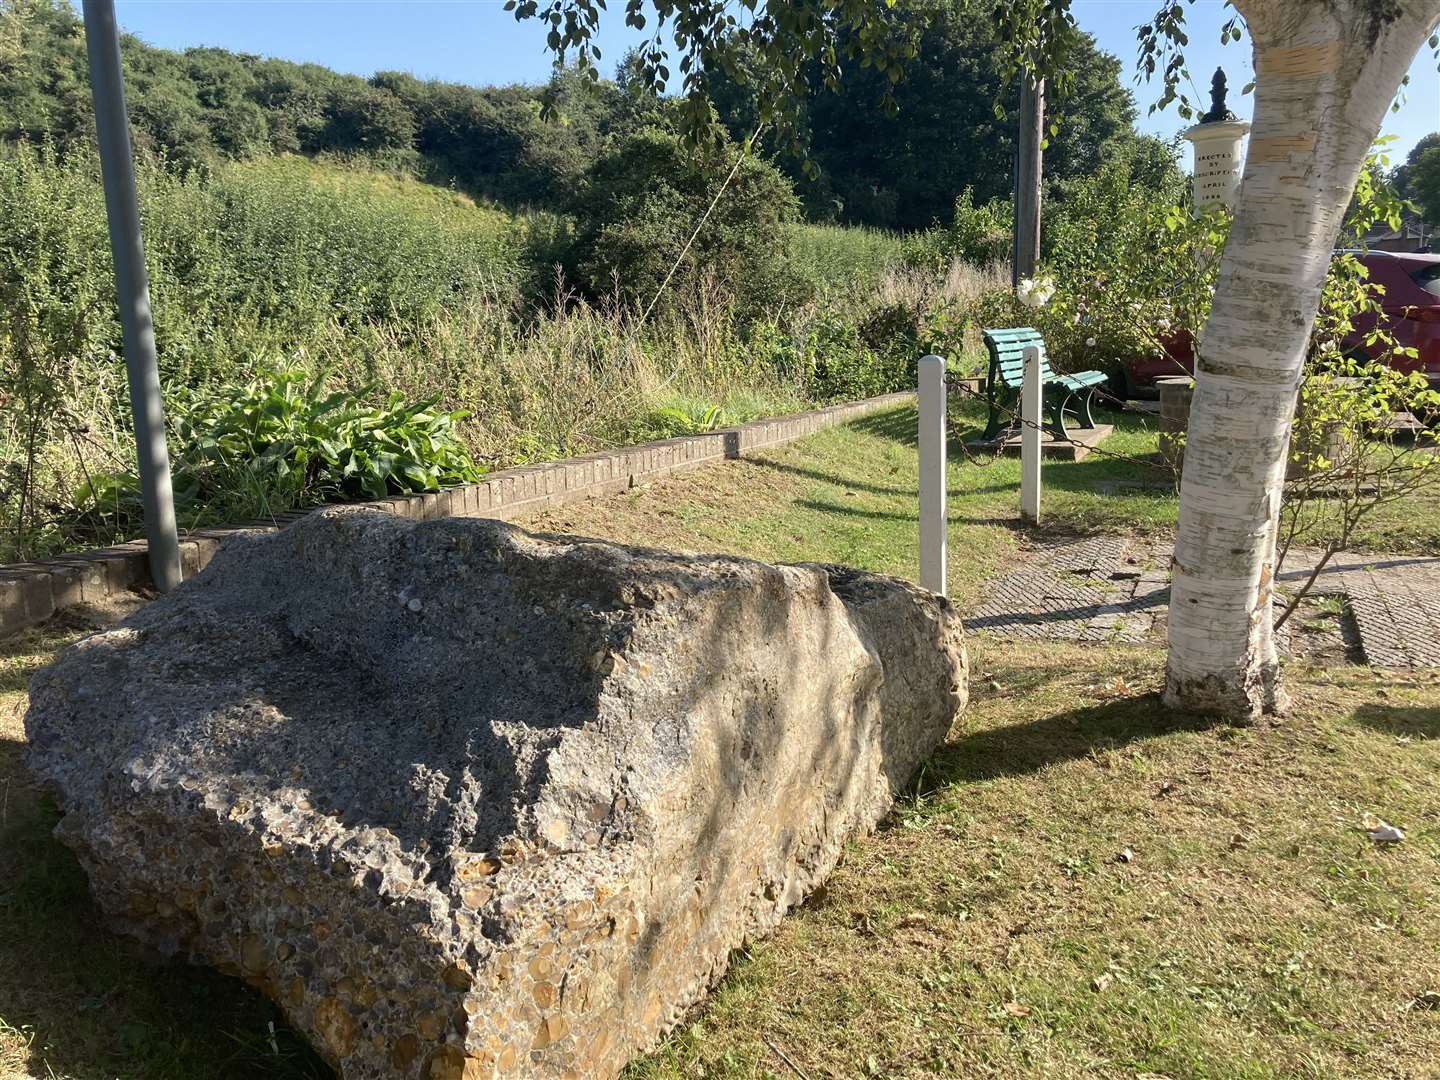 The stone is going on display in the village of Little Hadham (Hertfordshire County Council)